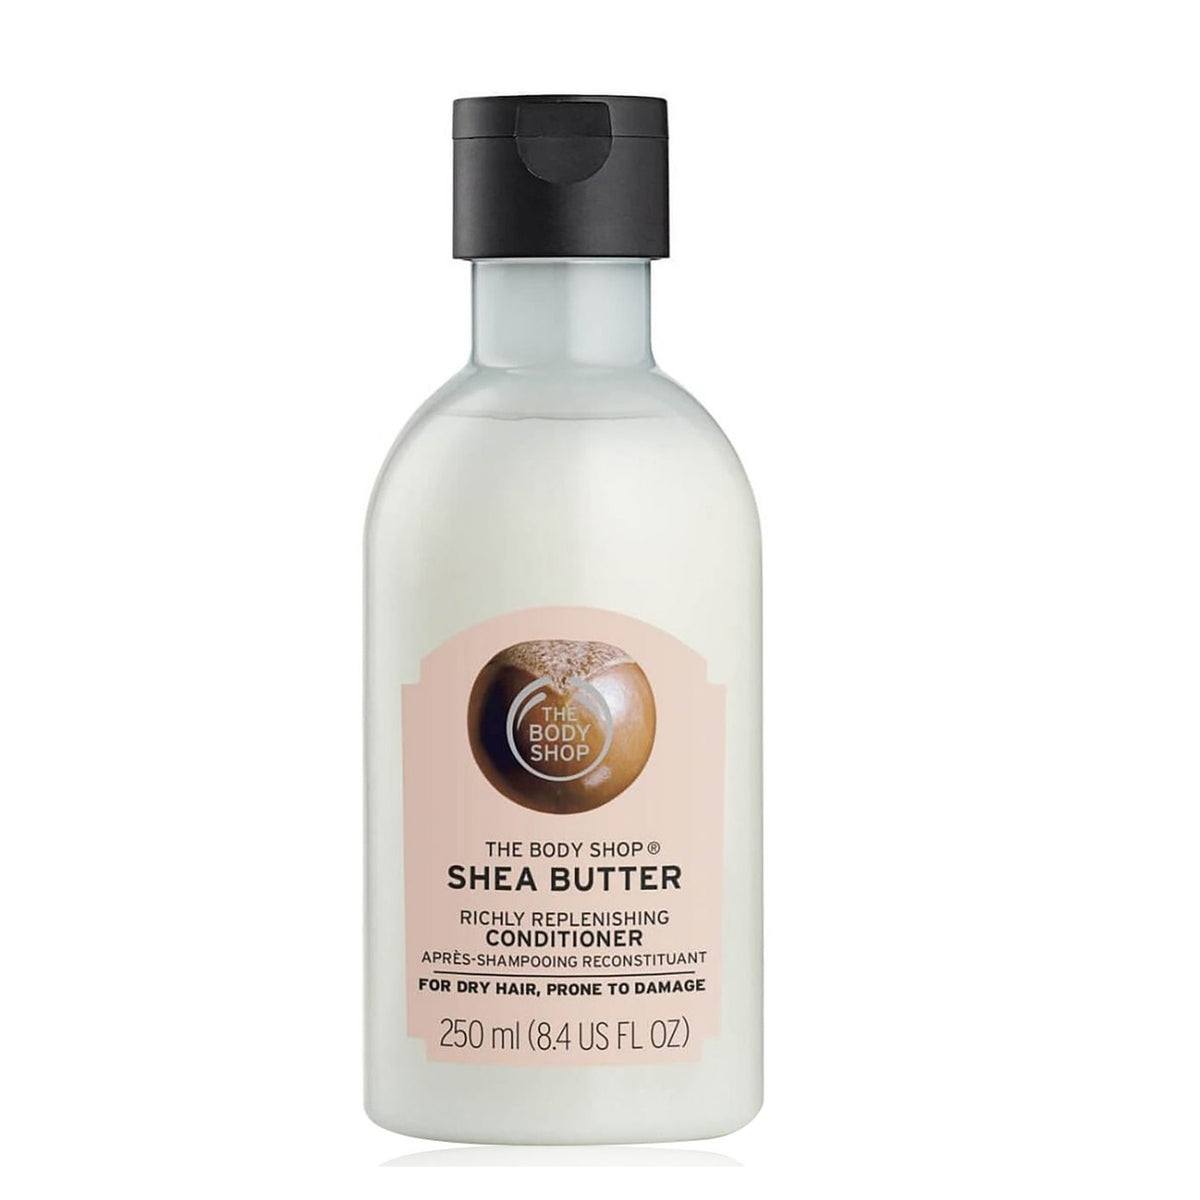 The Body Shop Shea Butter Conditioner (250 ml) The Body Shop